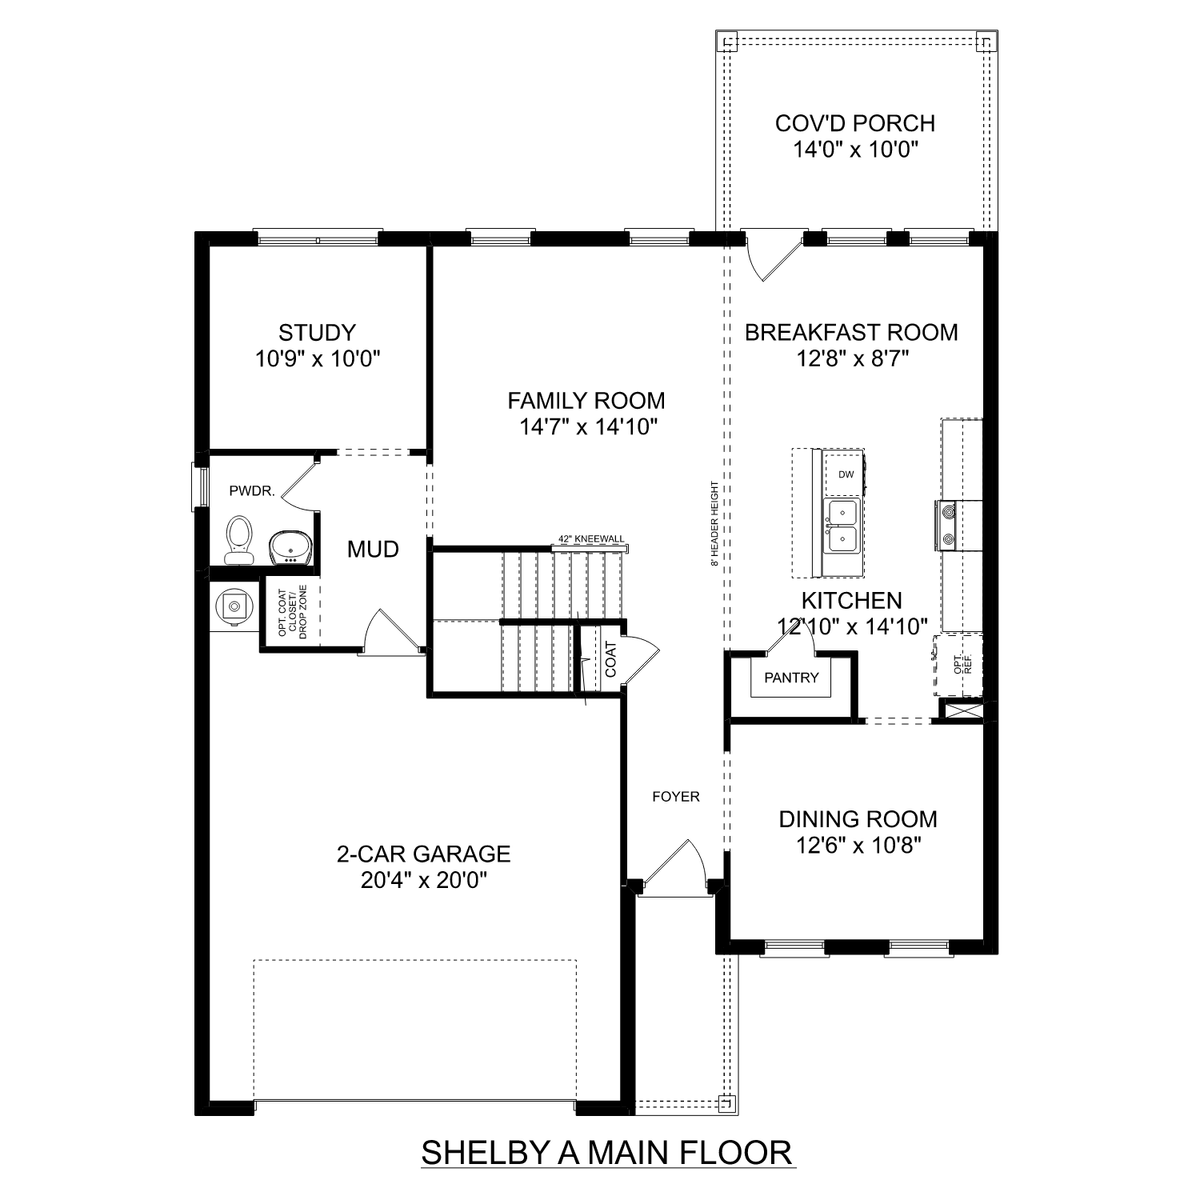 1 - The Shelby A buildable floor plan layout in Davidson Homes' Mallard Landing community.